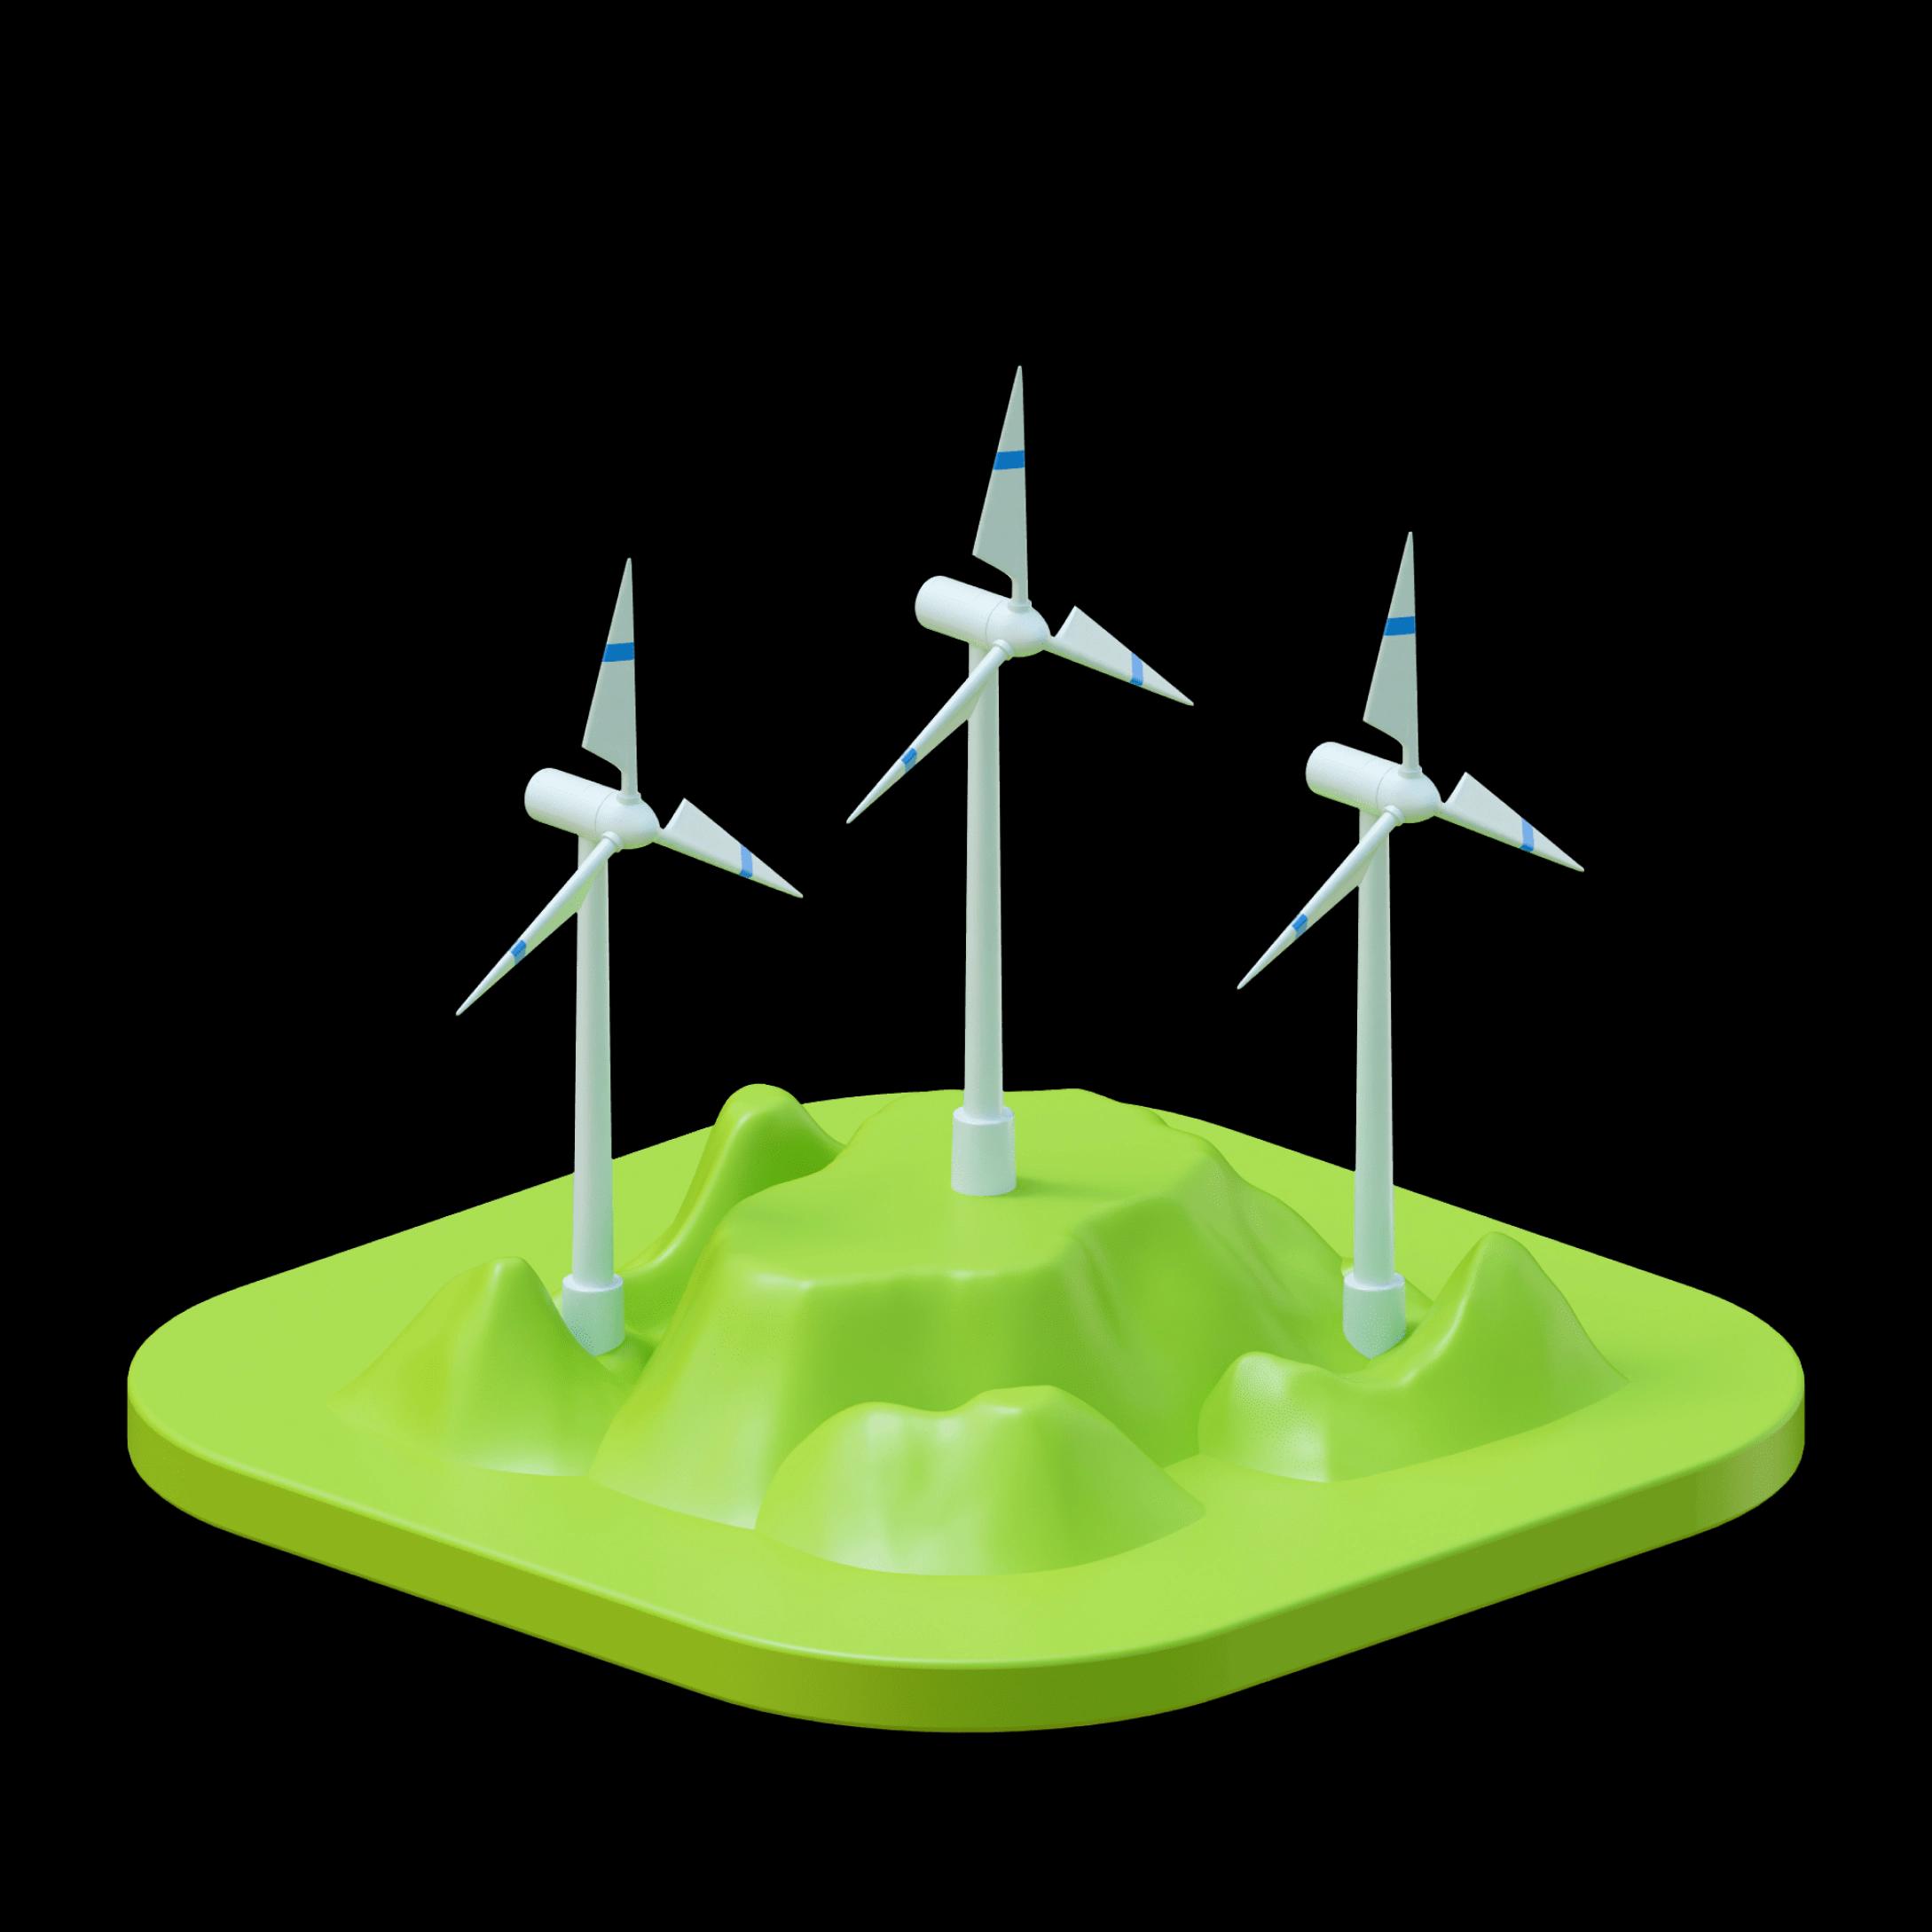 A small 3d model of a modern wind power plant with multiple turbines